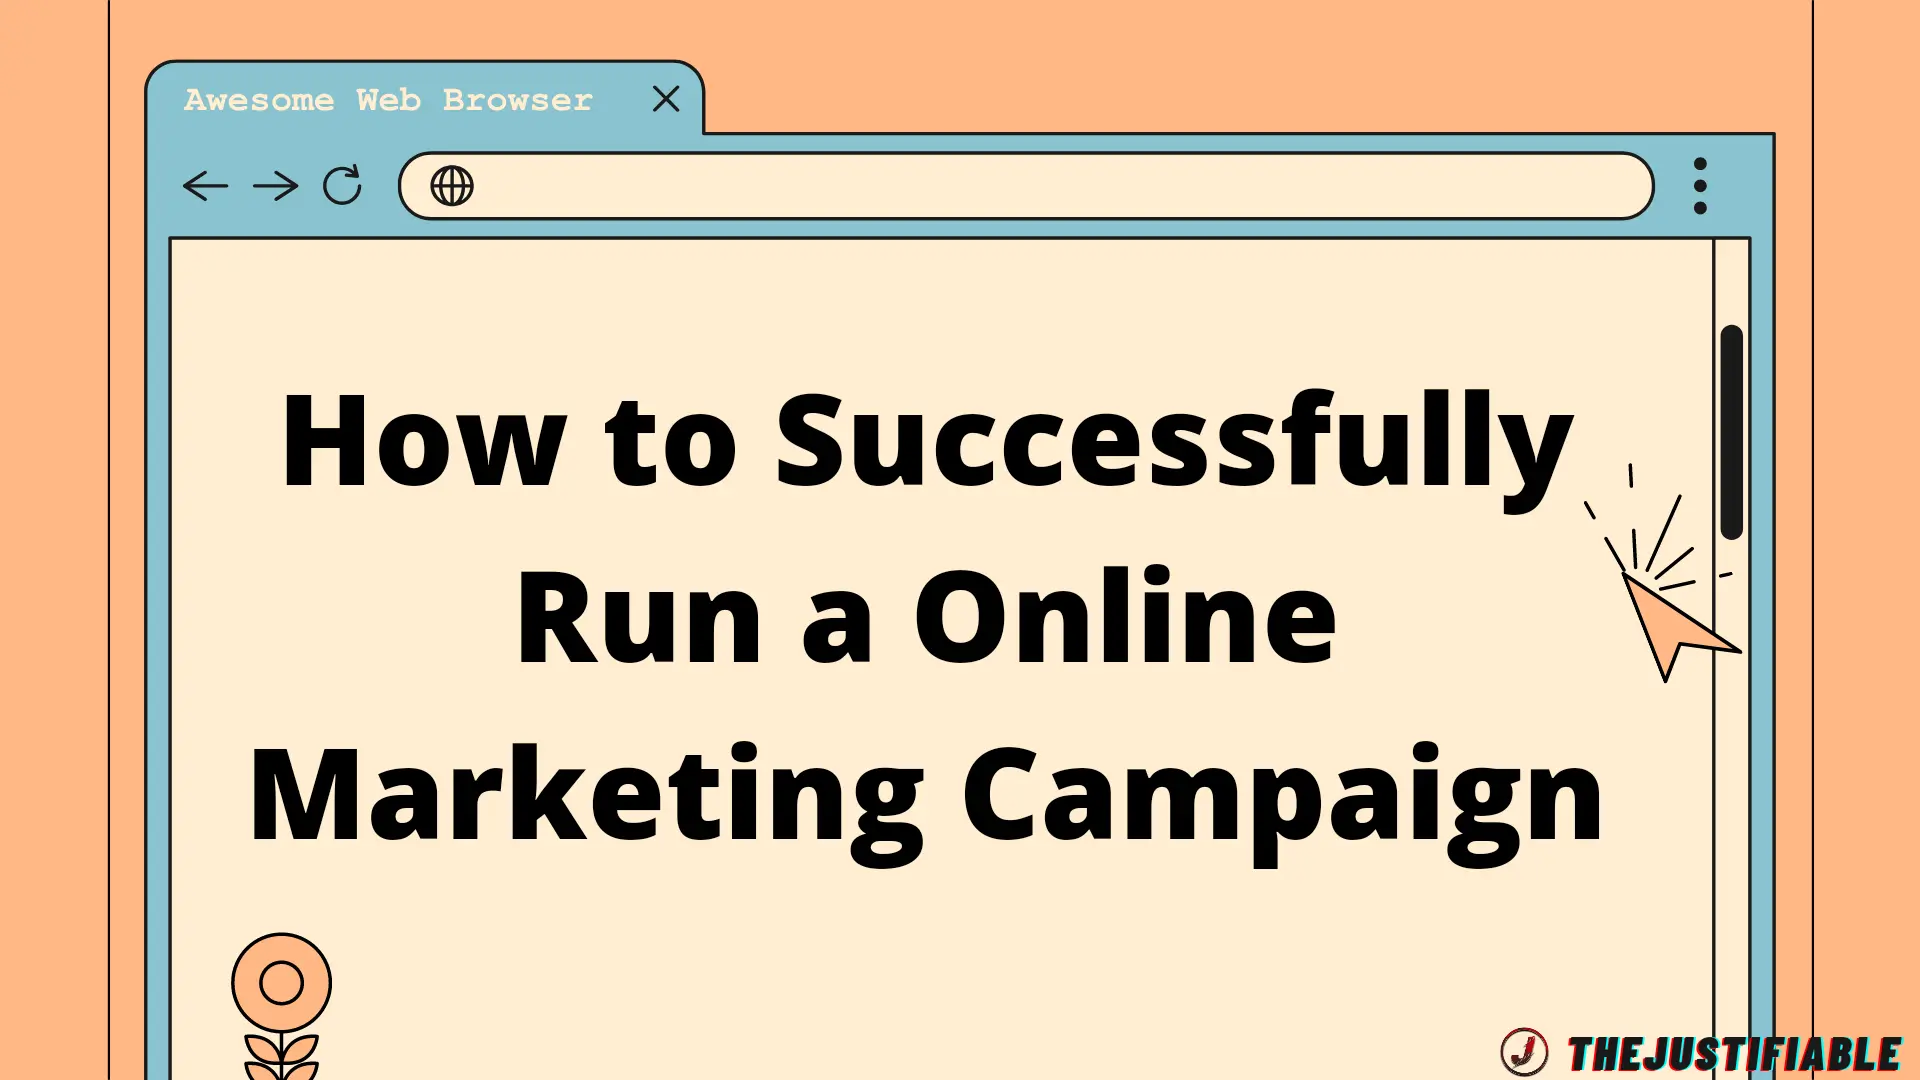 The image is a graphic related to Online Marketing Campaign